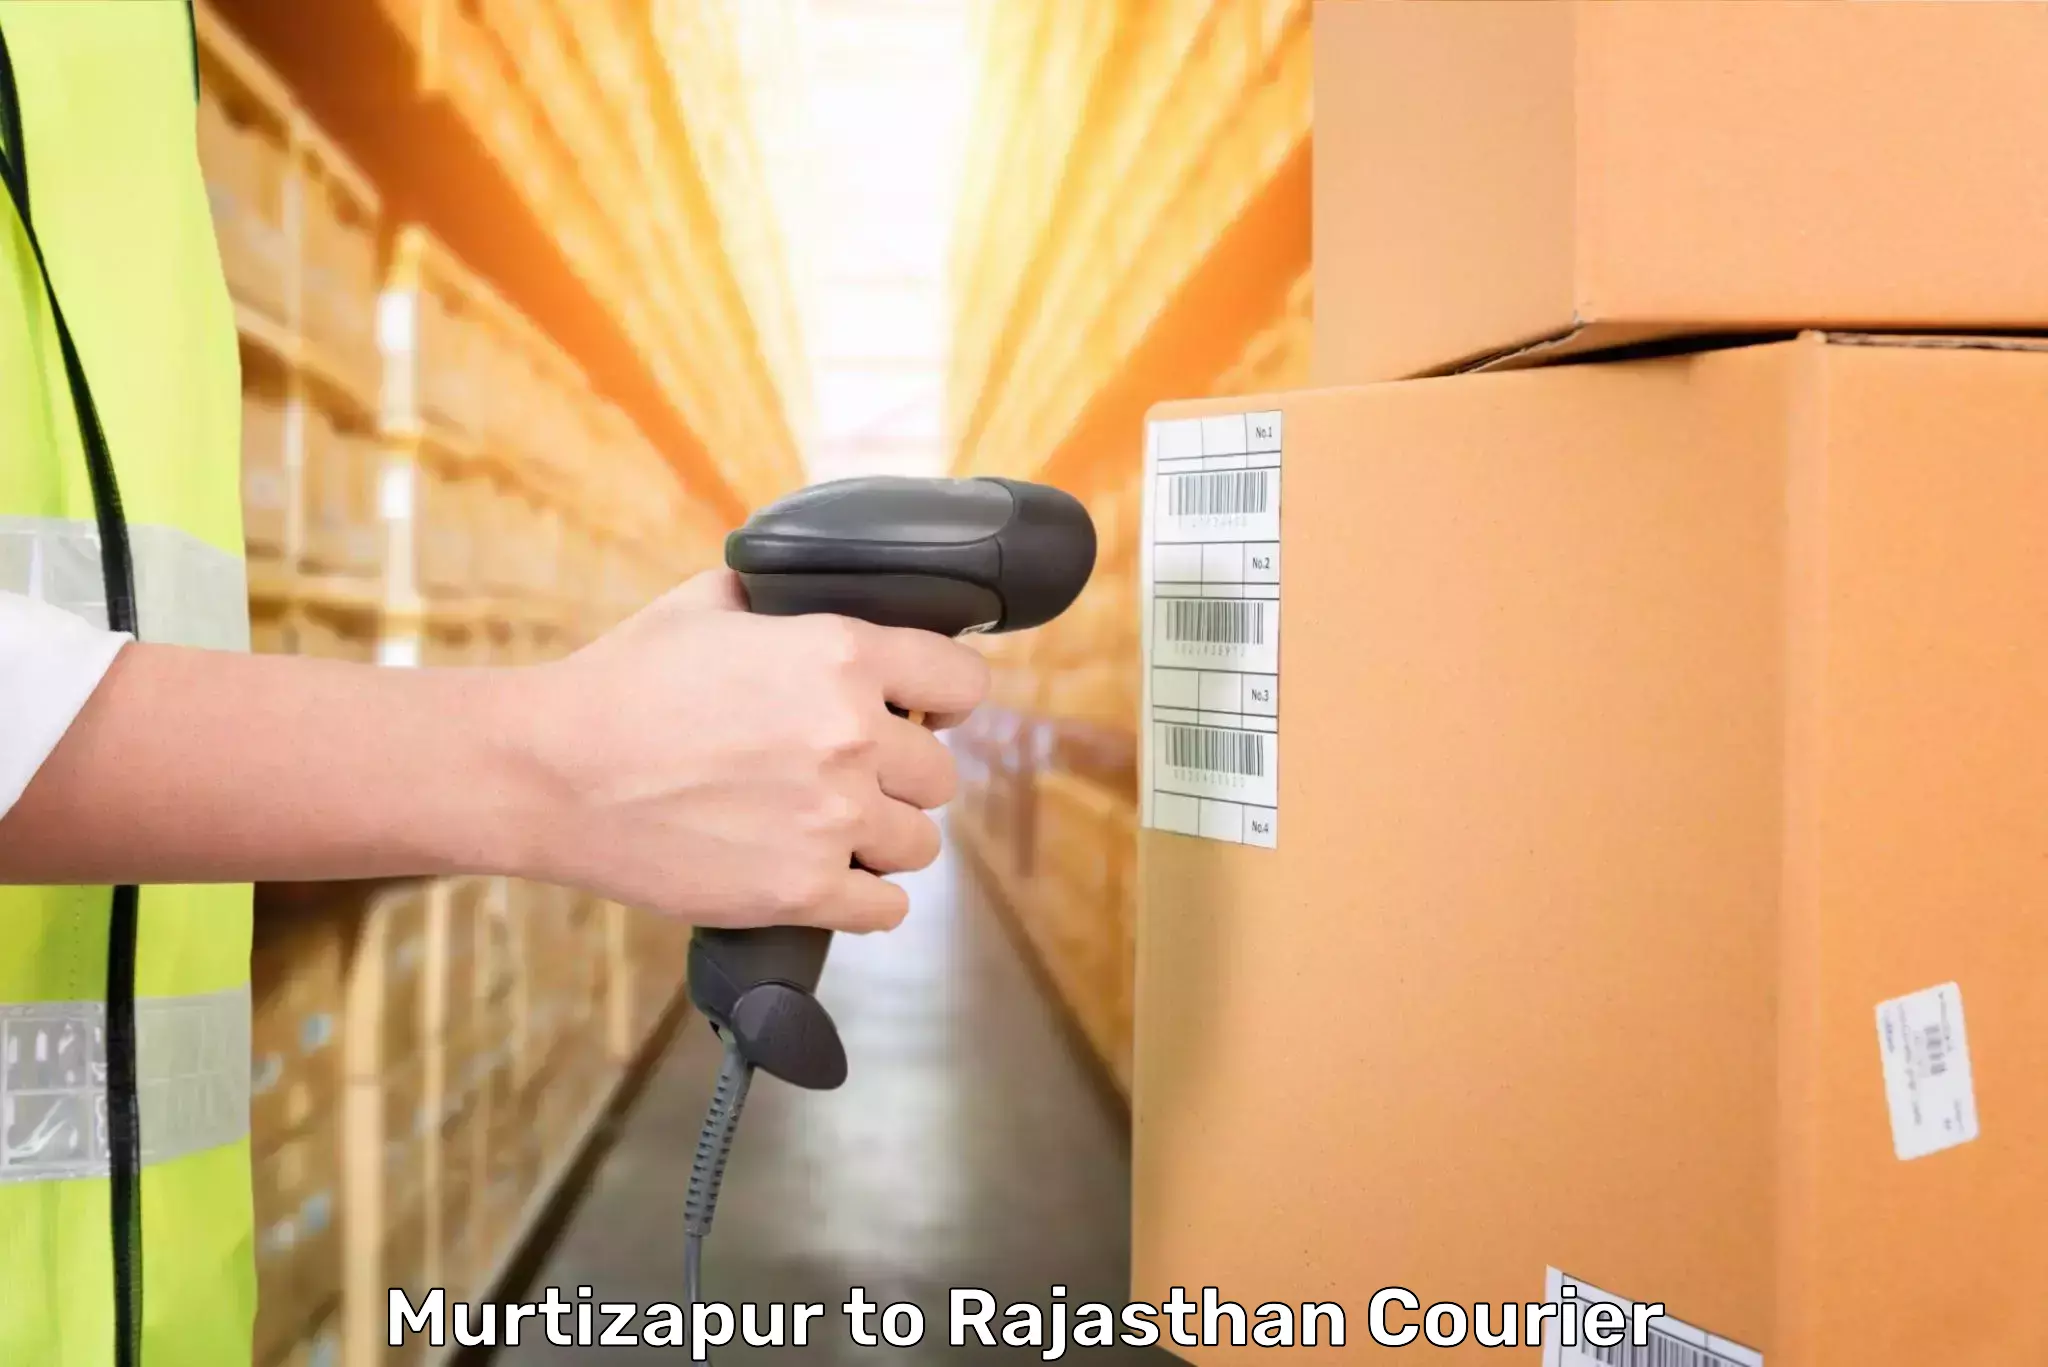 Luggage transport consultancy Murtizapur to Rajasthan